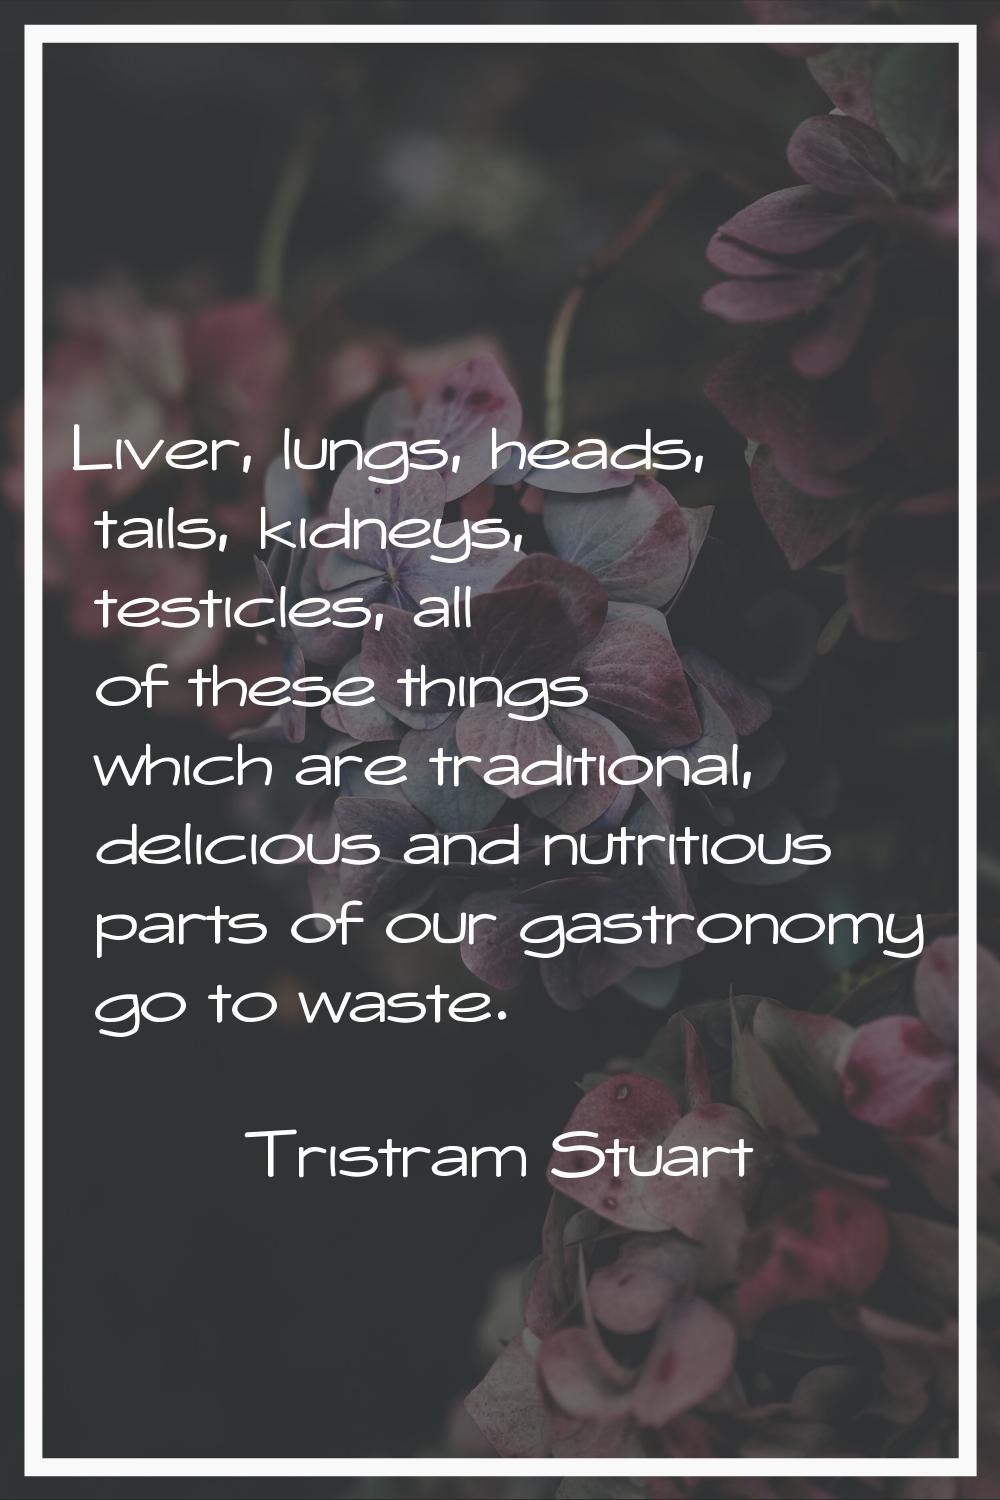 Liver, lungs, heads, tails, kidneys, testicles, all of these things which are traditional, deliciou